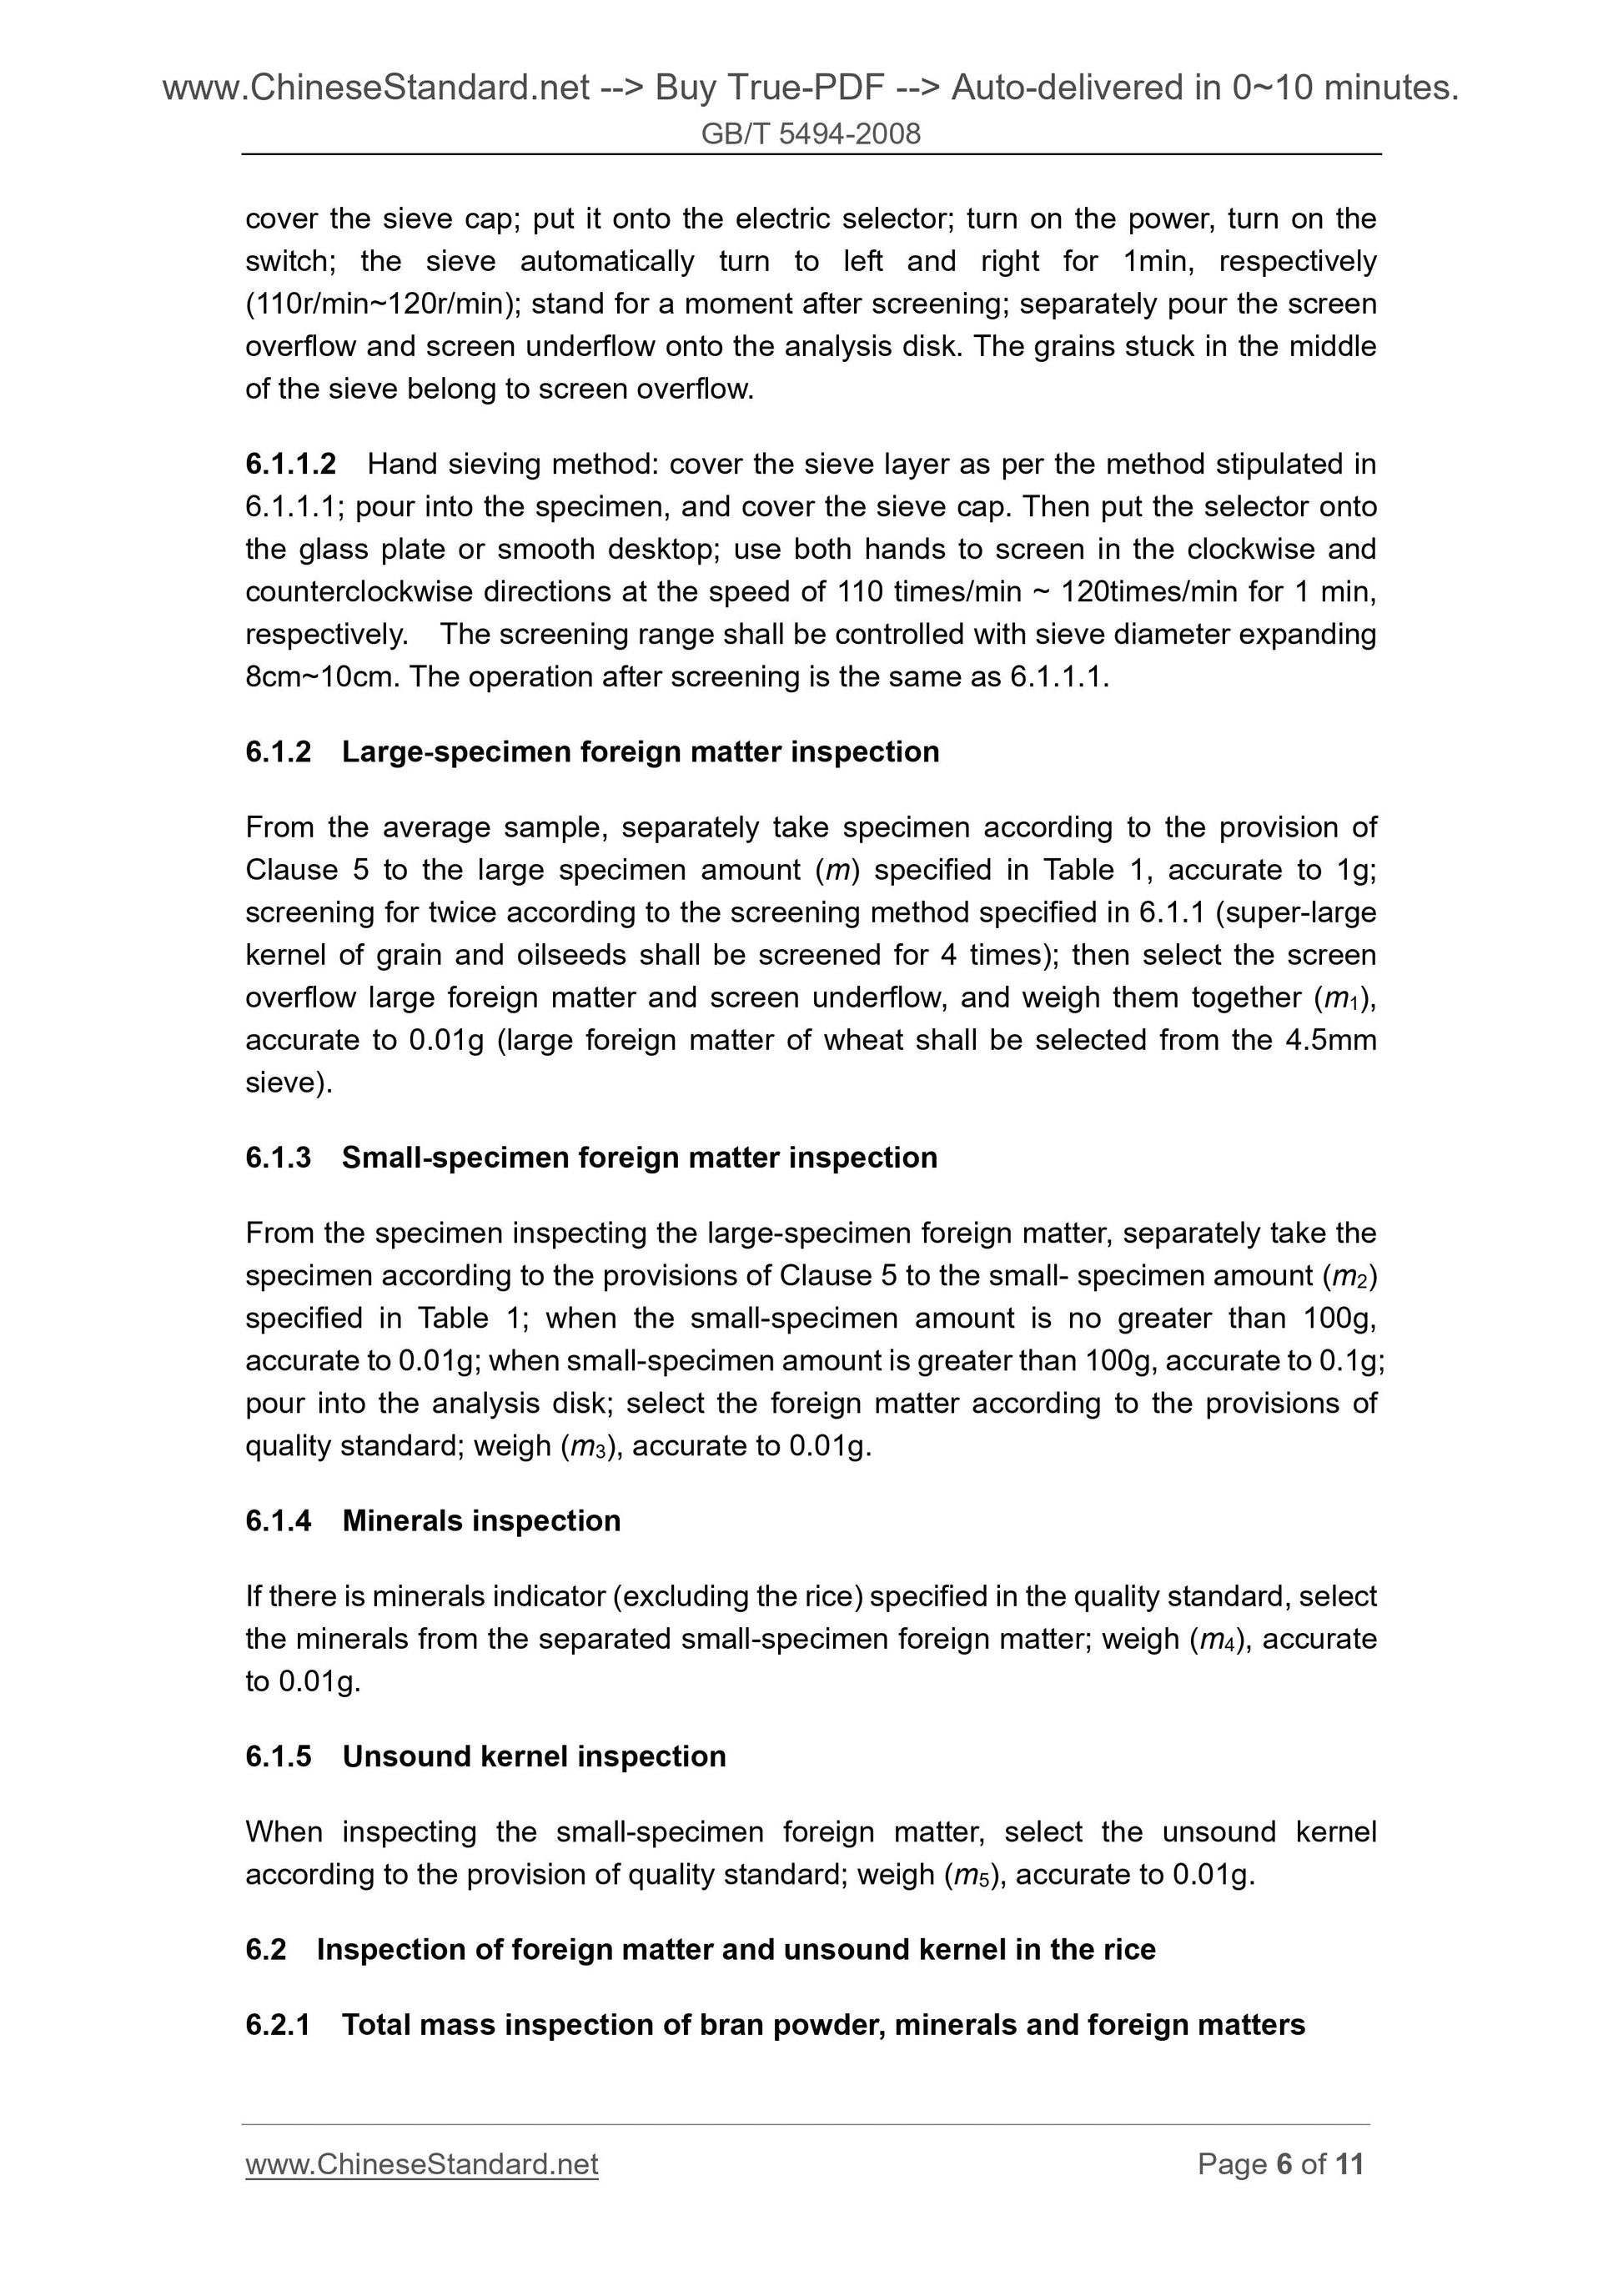 GB/T 5494-2008 Page 5